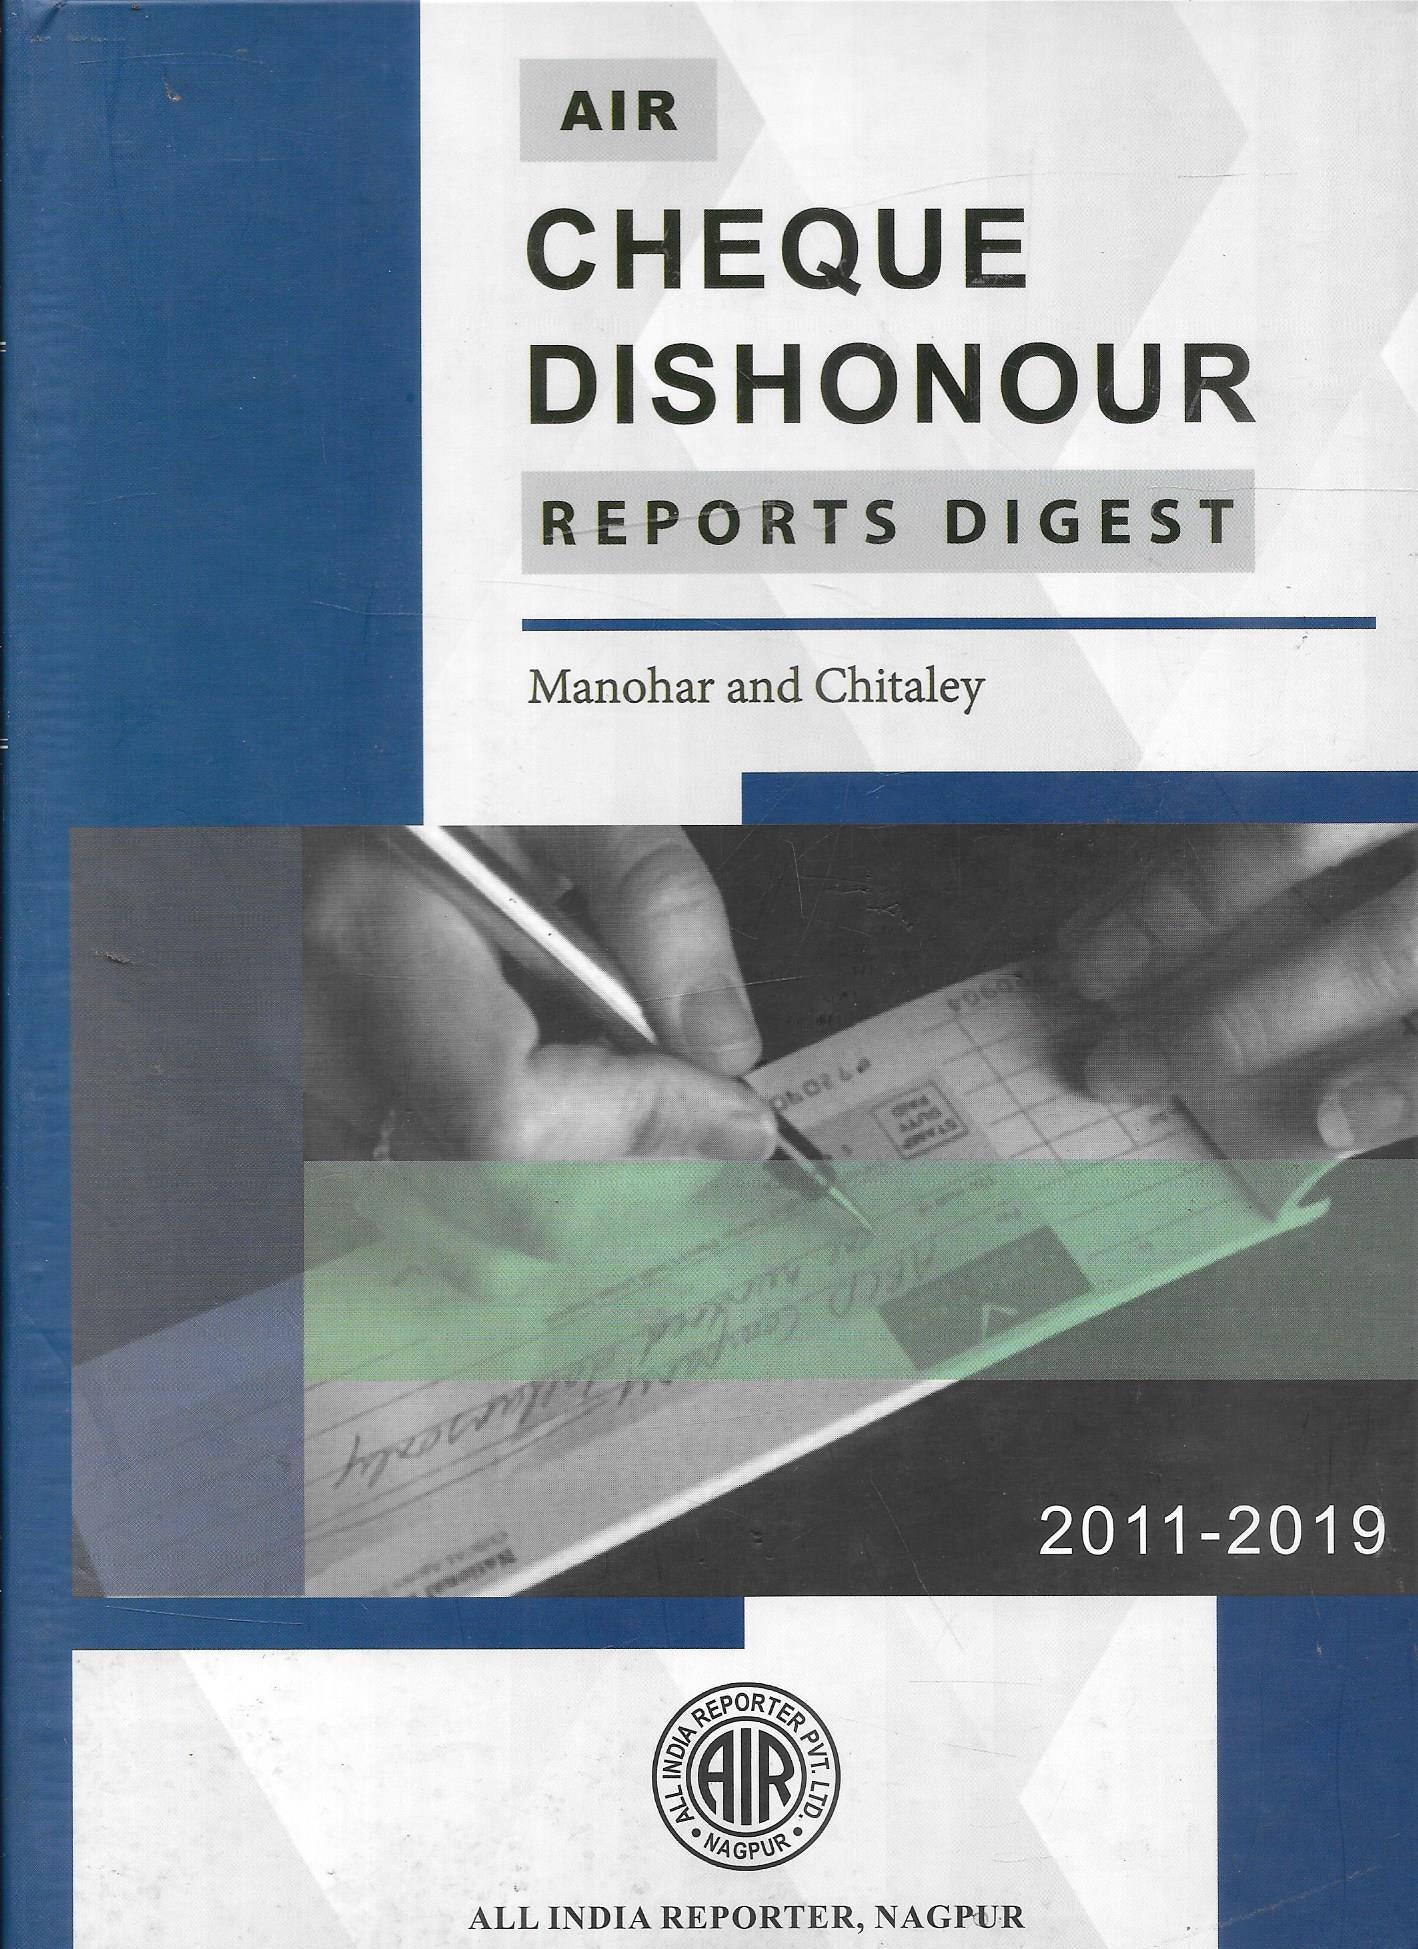 Cheque Dishonour Report Digest (2011 - 2019)